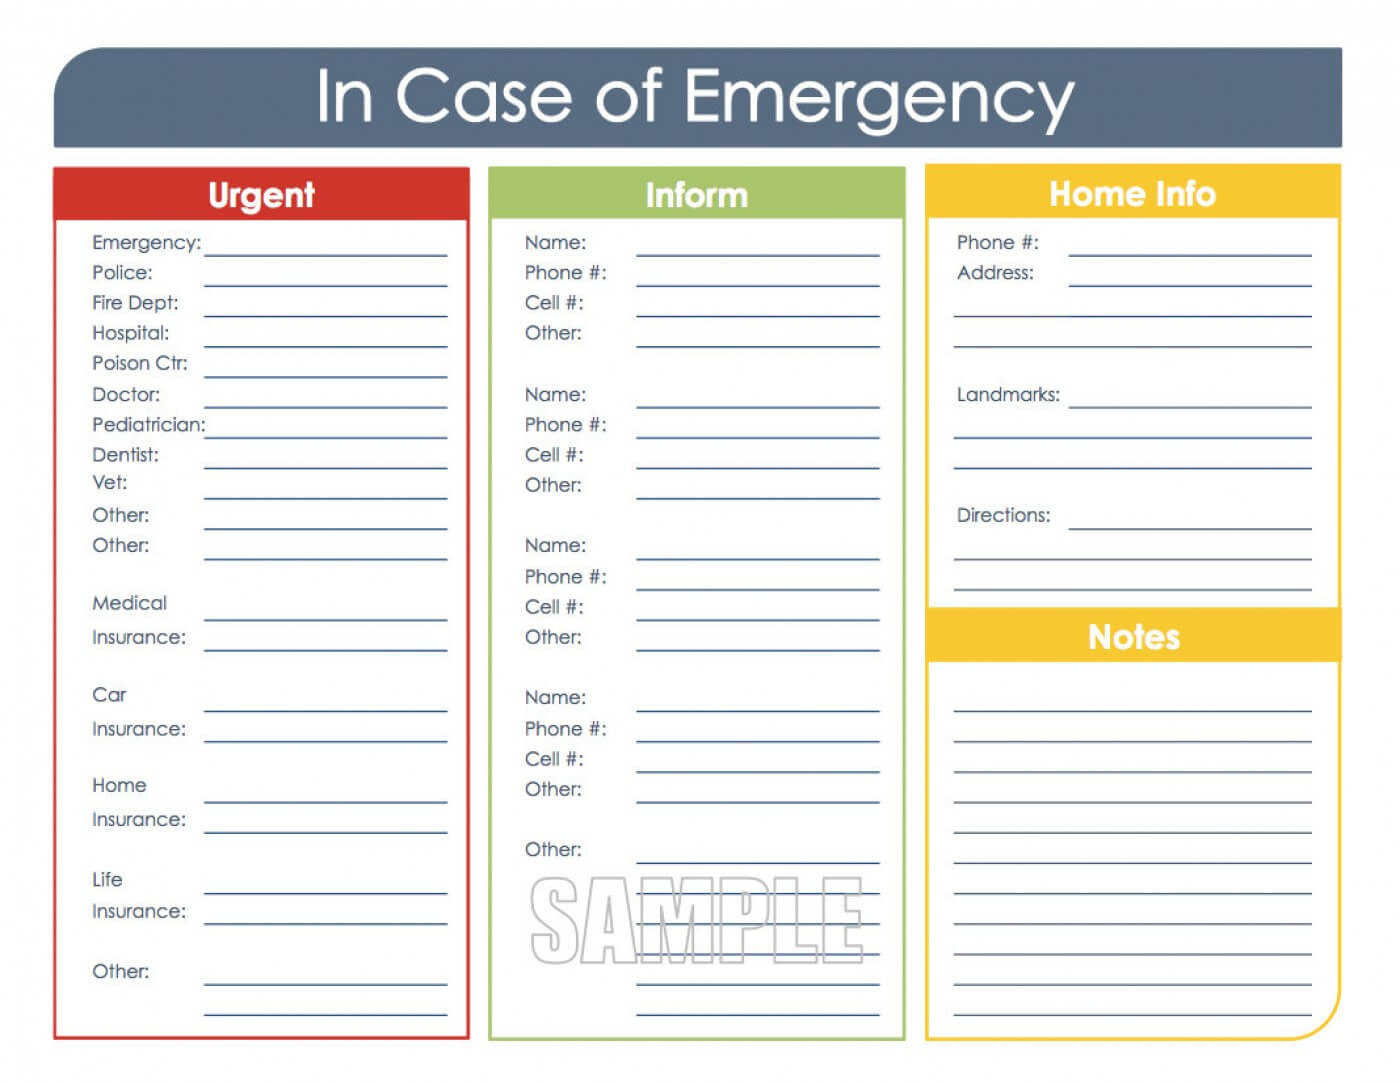 008 Emergency Contact Card Template Ideas Employee Stunning With Regard To In Case Of Emergency Card Template